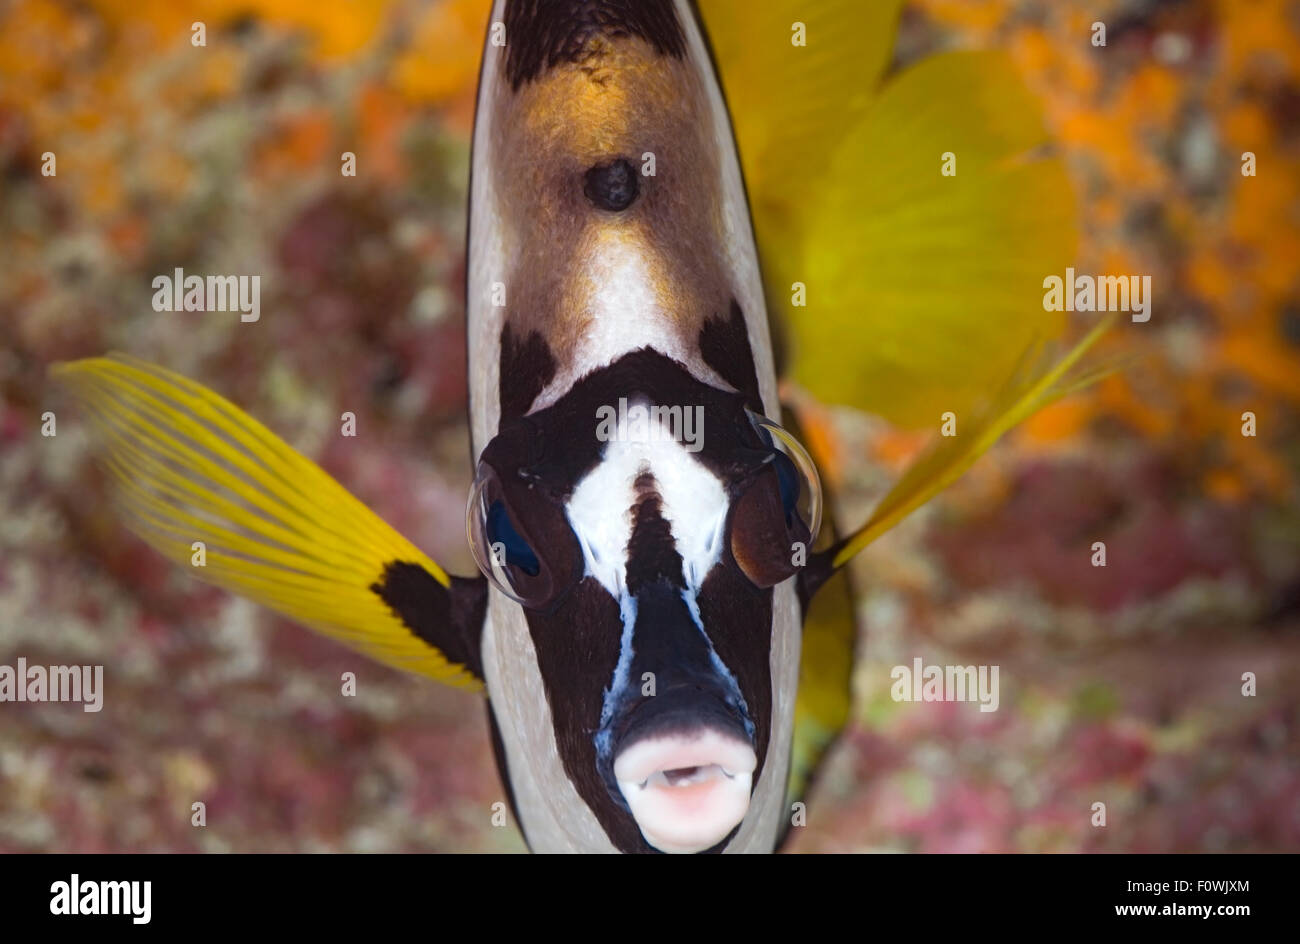 CLOSE-UP FACE VIEW OF BUTTERFLYFISH SWIMMING ON CORAL REEF Stock Photo